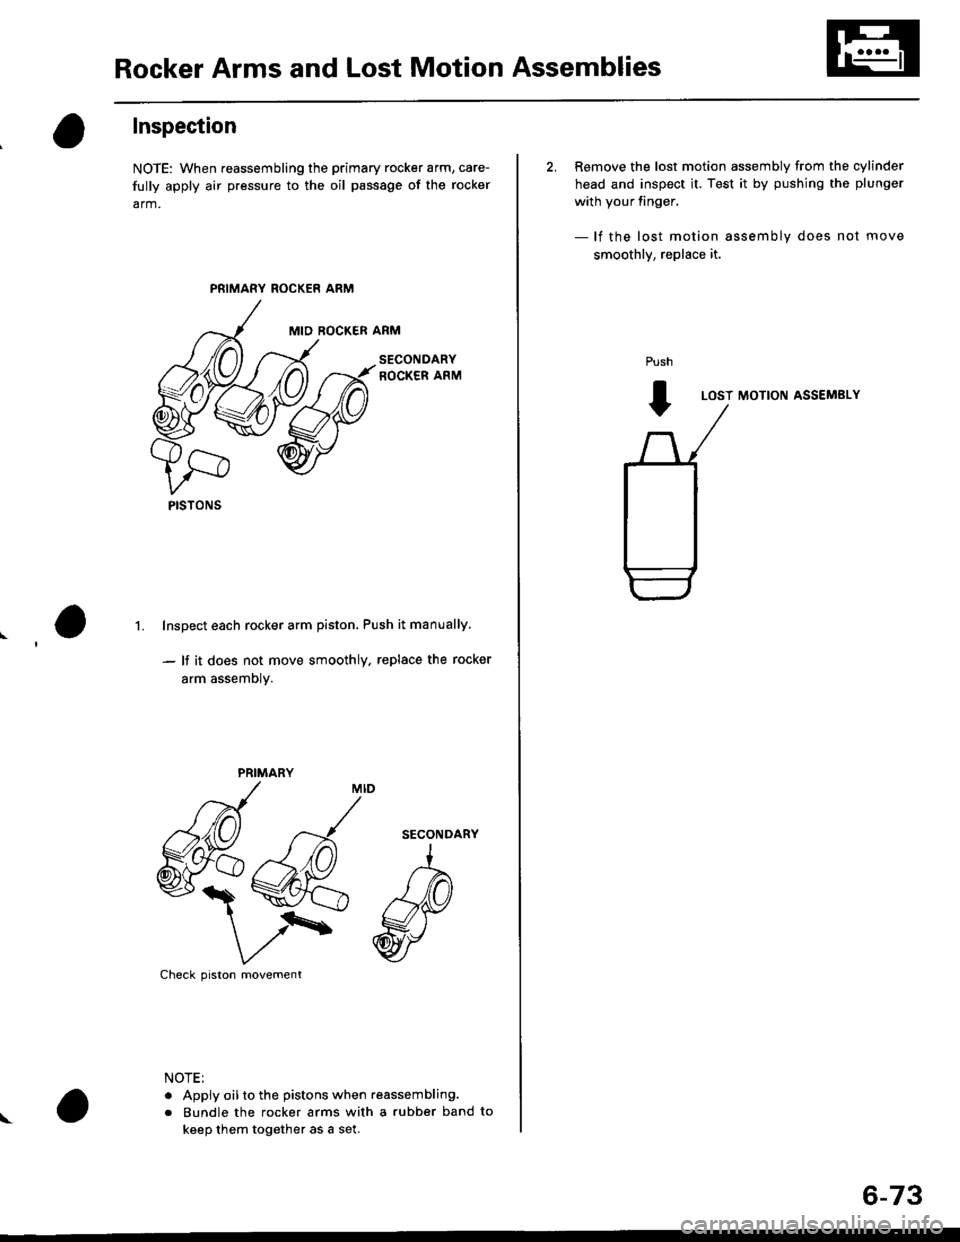 HONDA CIVIC 1996 6.G Owners Manual Rocker Arms and Lost Motion Assemblies
Inspection
NOTE: When reassembling the primary rocker arm, care-
fully apply air pressure to the oil passage of the rocker
arm.
PRIMARY ROCKER ARM
MID ROCKER ARM